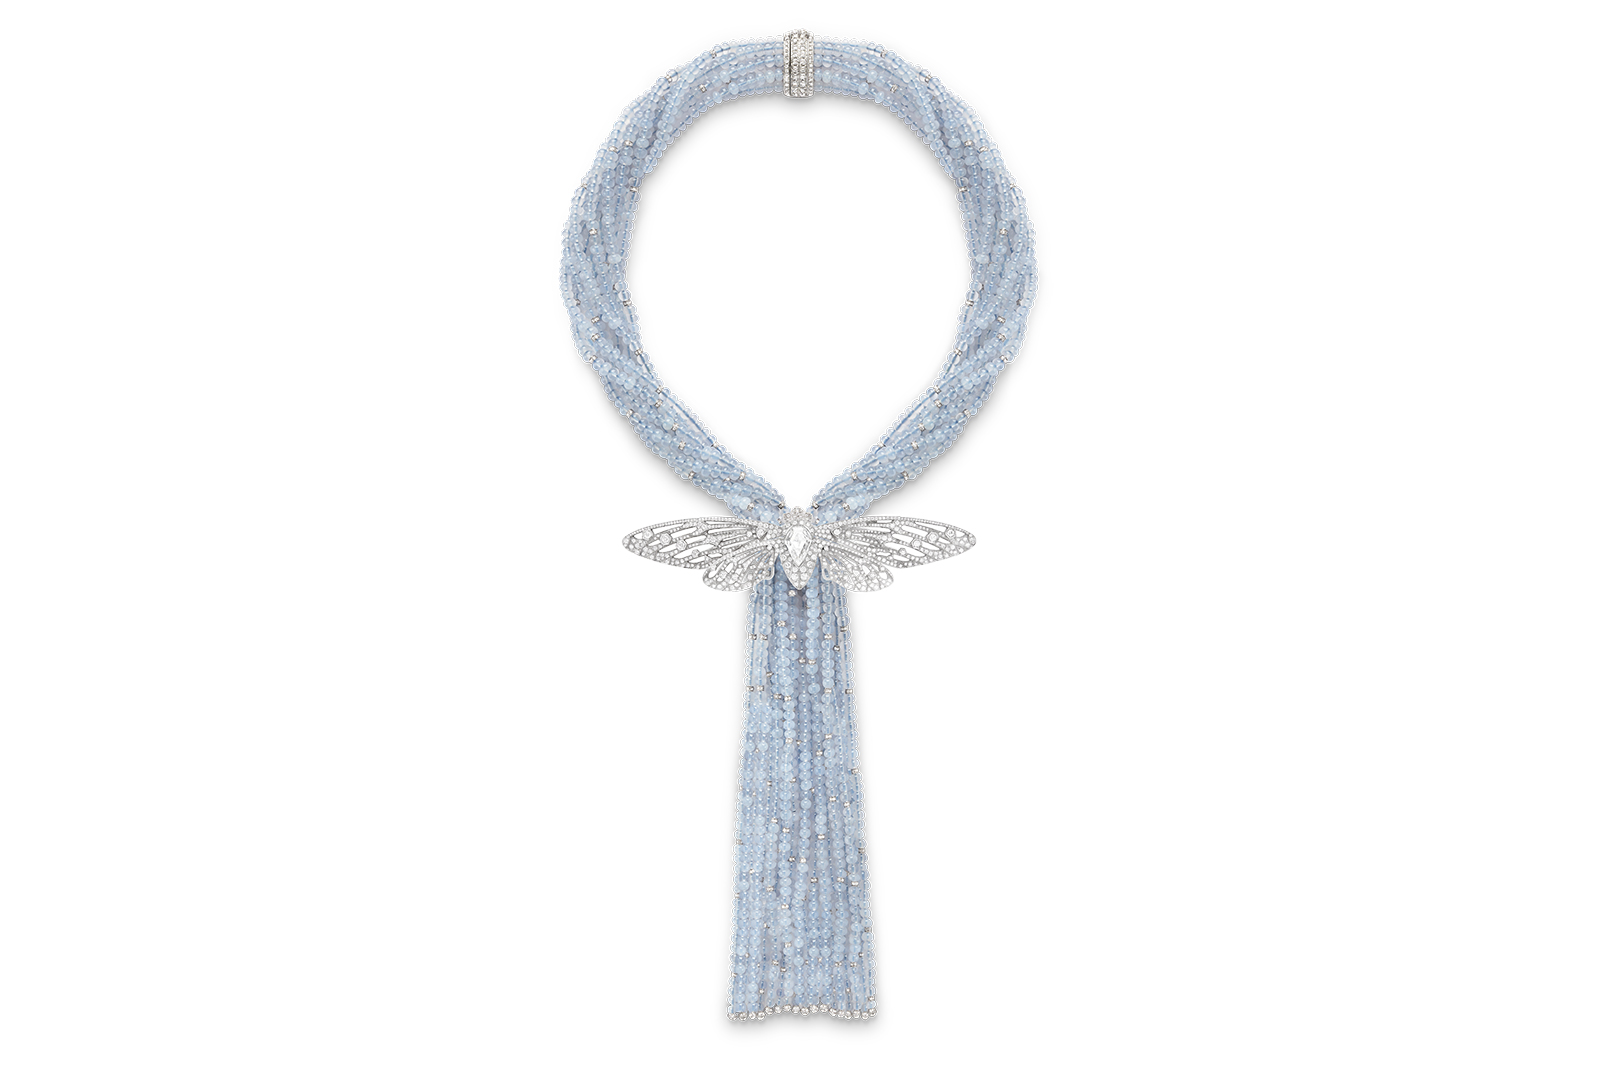 Boucheron ‘Cigale des Neiges’ necklace with detachable cicada motif in 3.07 carat kite diamond and pavé diamonds on white gold attached to chalcedony bead tassel necklace